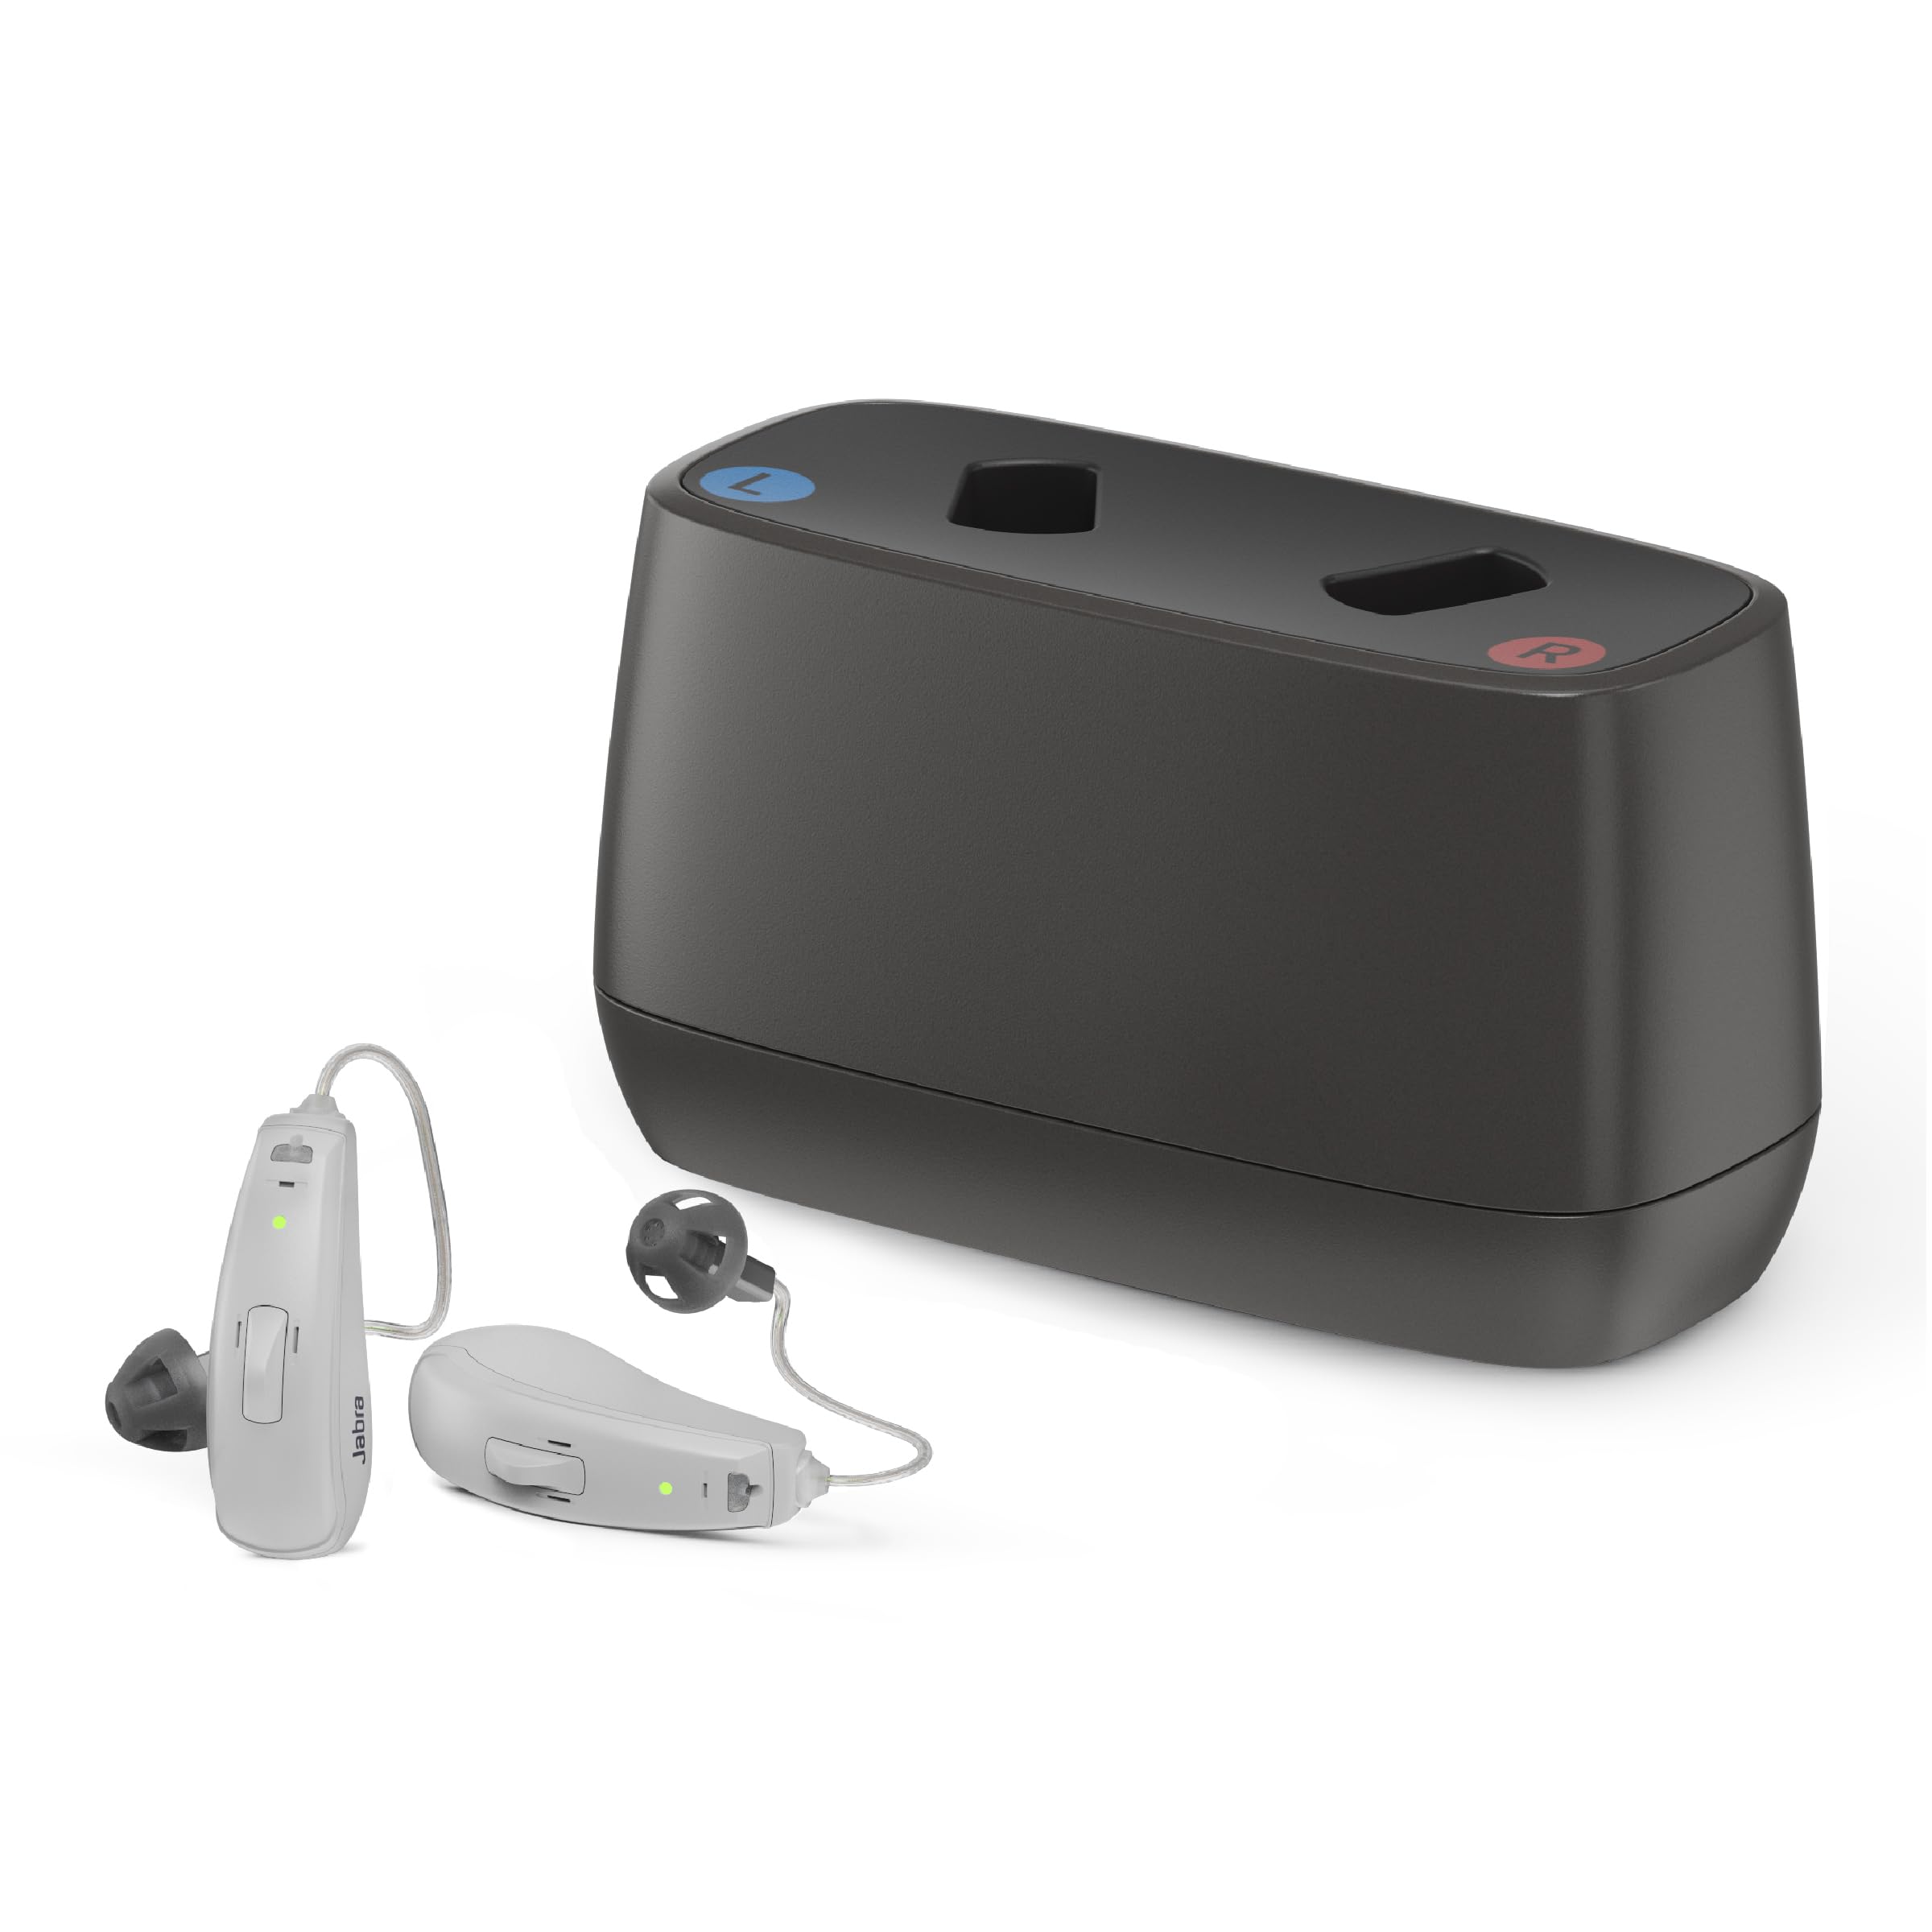 Jabra Enhance Select 50R Hearing Aids - Rechargeable, Nearly Invisible & Lightweight for All-Day Comfort - Designed for Mild to Moderate Hearing Loss - Includes Virtual Audiology Care – Gray